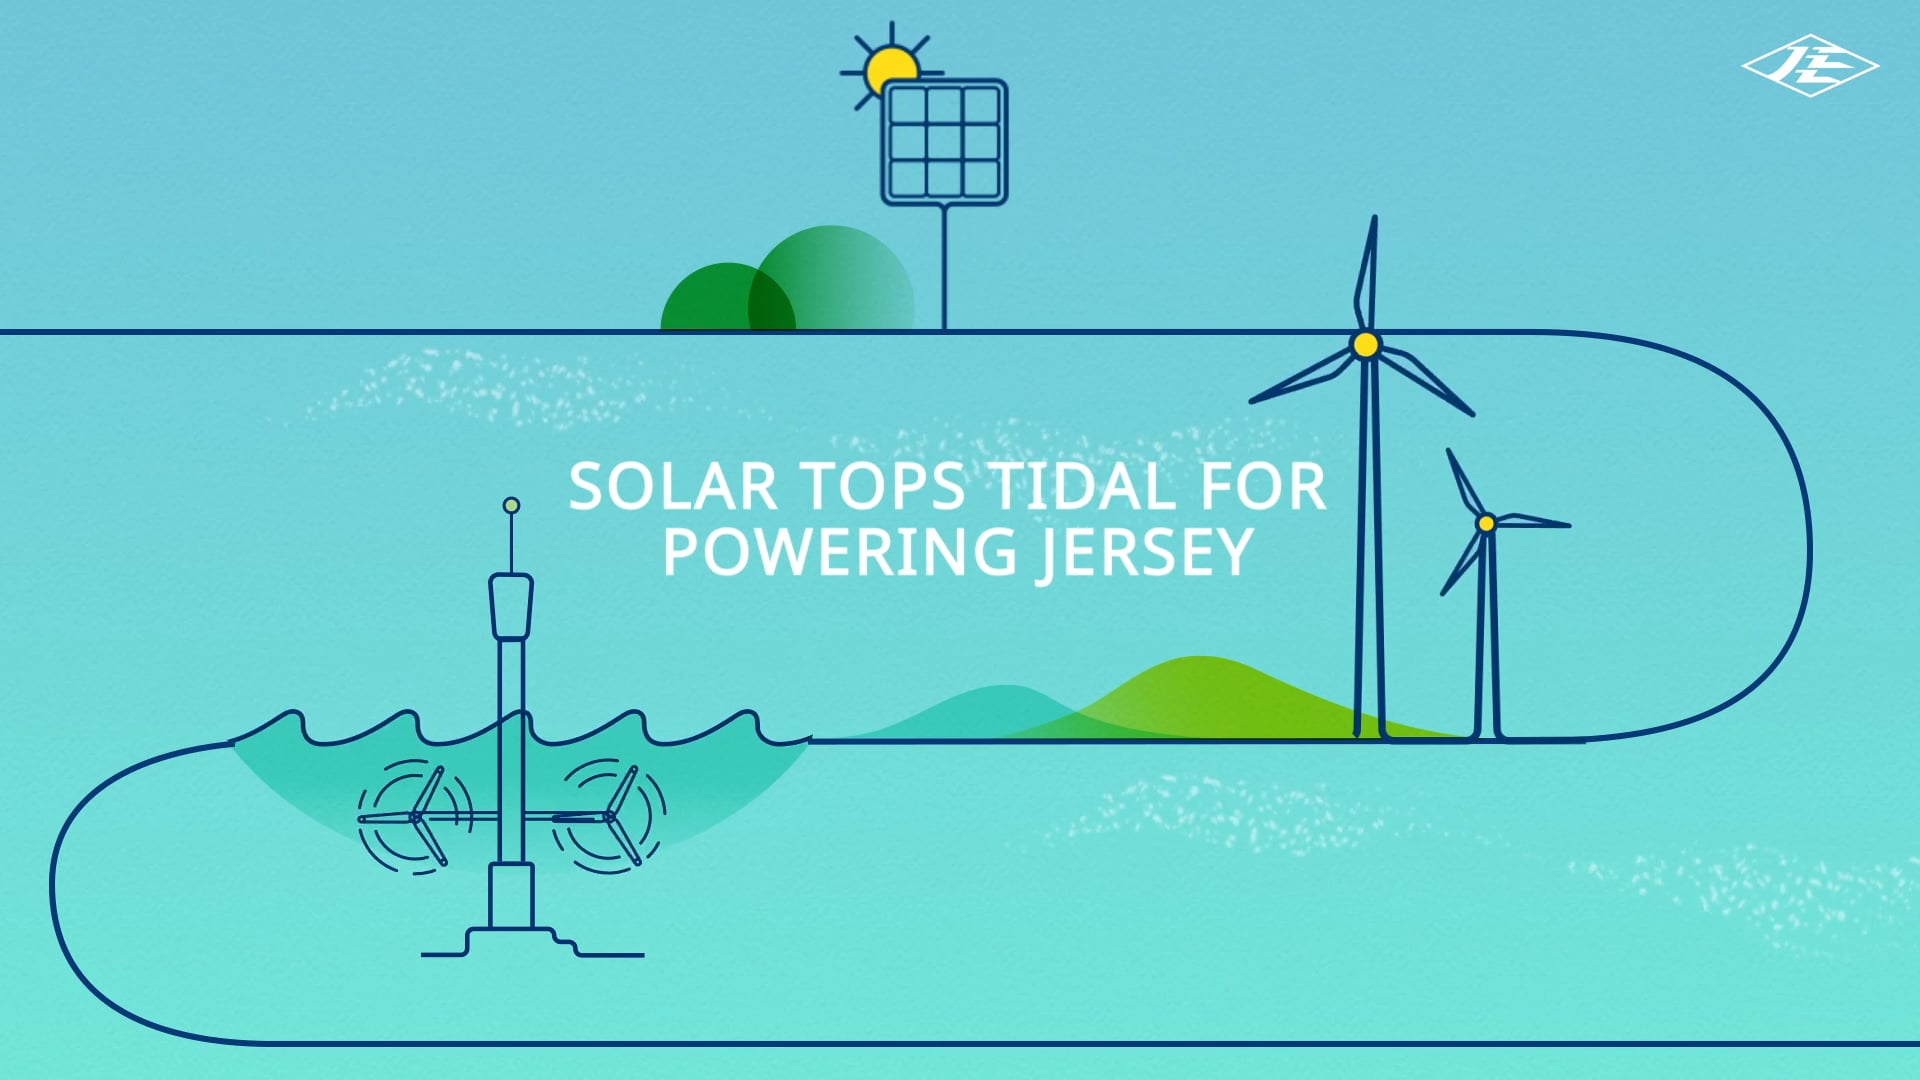 Graphic showing why solar tops tidal in Jersey